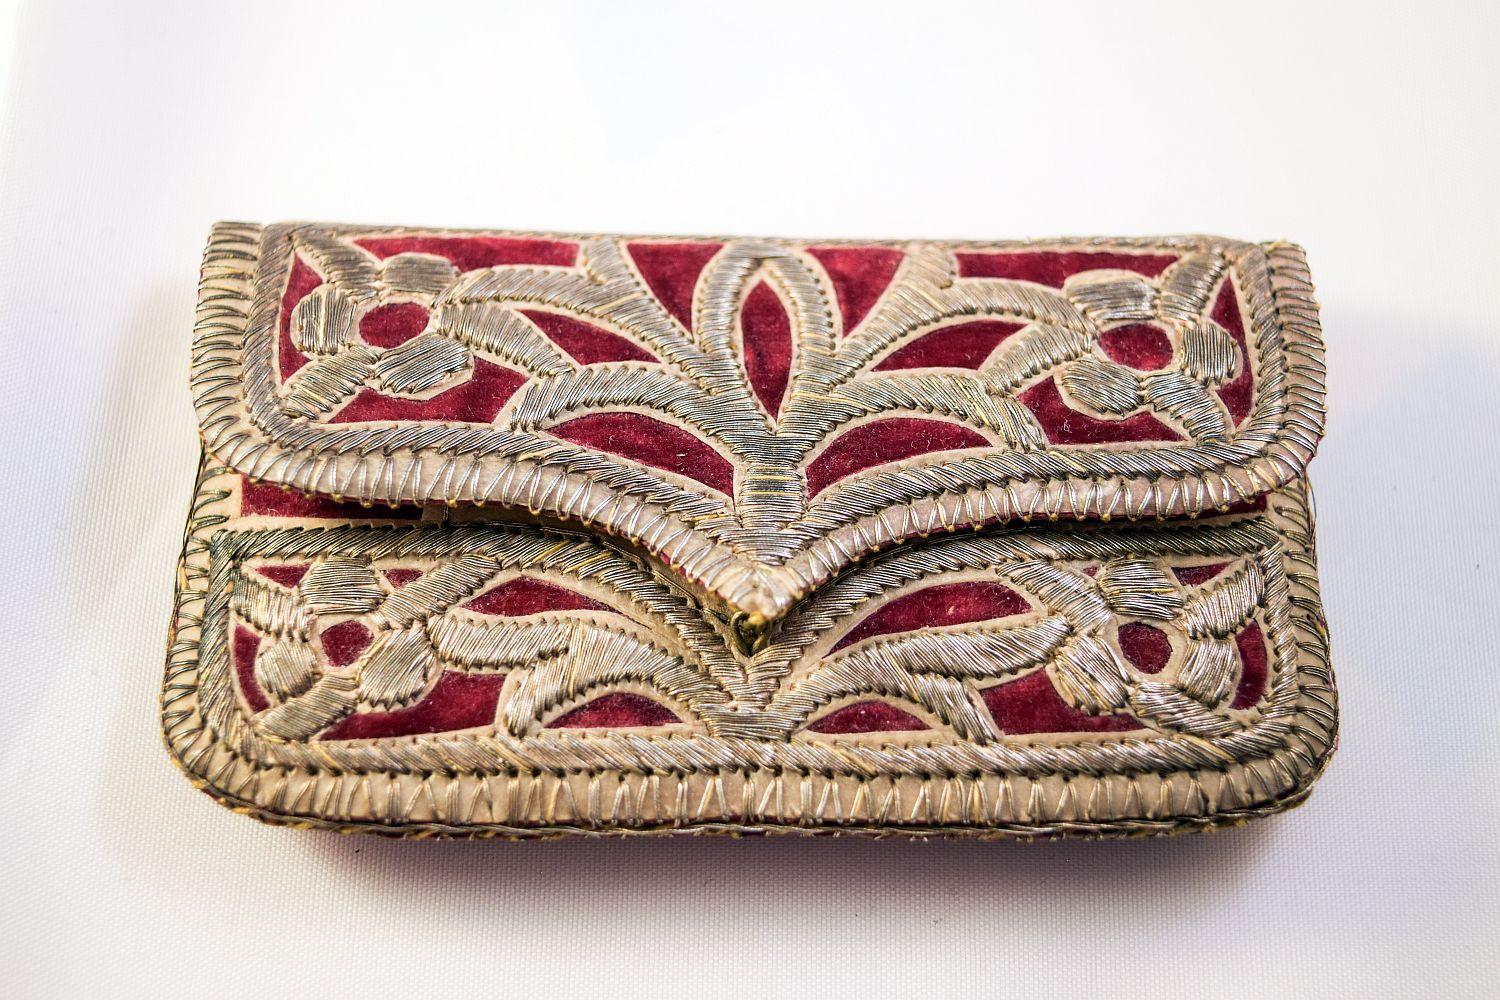 Ottoman Turkish Metal  Thread  Purse.
Silver Thread embroidery on Velvet.
Inside is lined with 3 different colour real soft leather.
In super condition probobly it has been never been used.
Size Length 11 cms and the width is 6 cms
Amazing to find